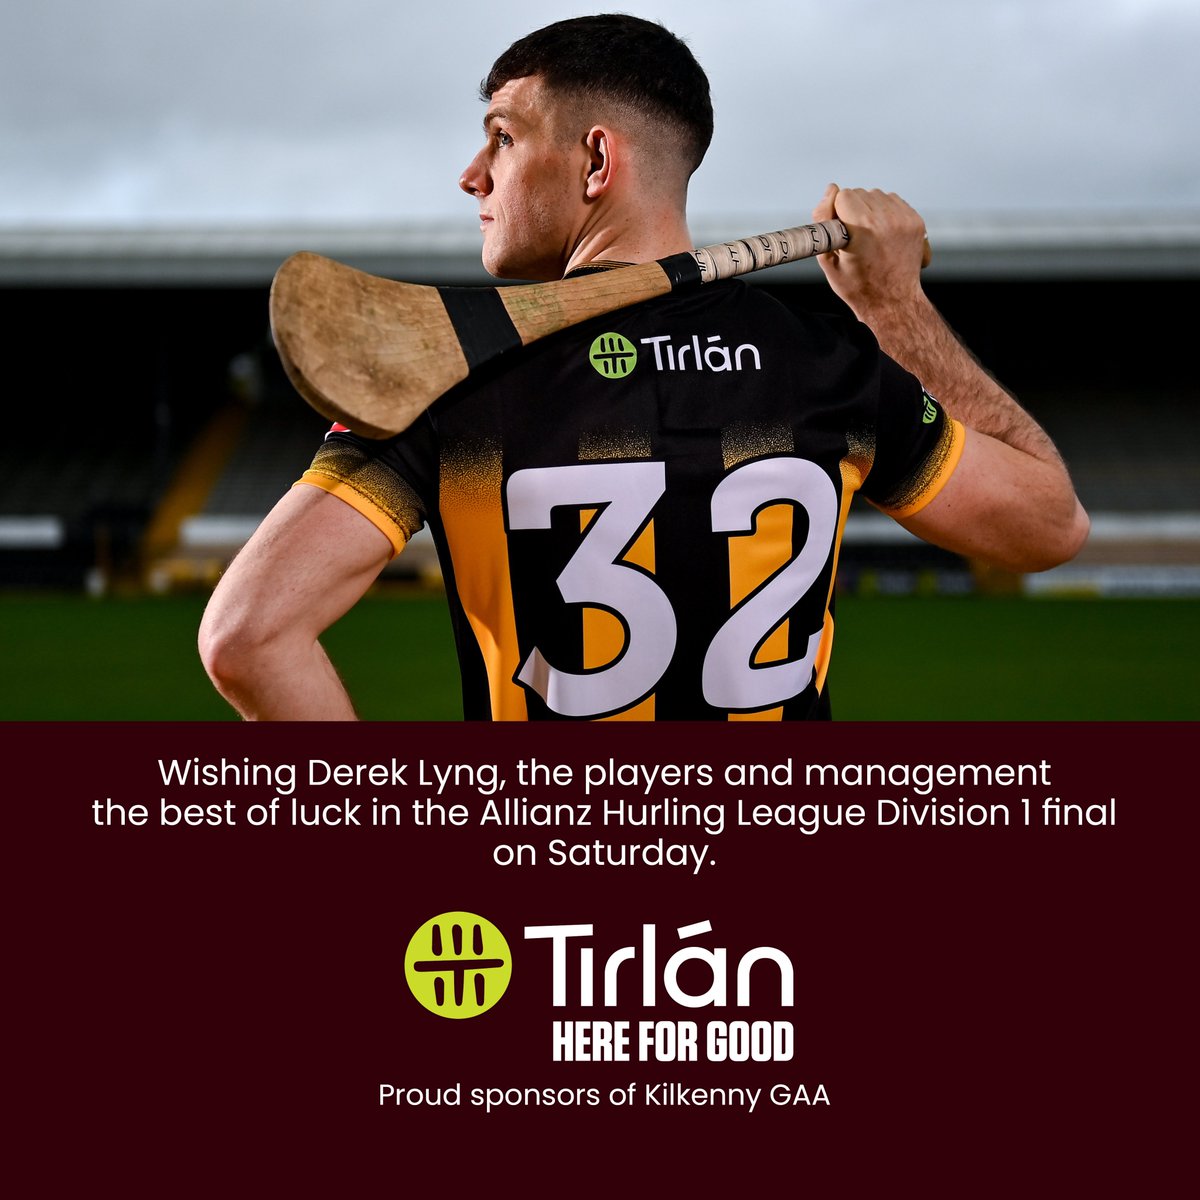 Wishing Derek Lyng, the players and management team the very best of luck in the 2024 Allianz Hurling League Final tomorrow Sat 6 April, throw-in 7:15pm. C'mon the Cats! #KilkennyGAA #hereforgood